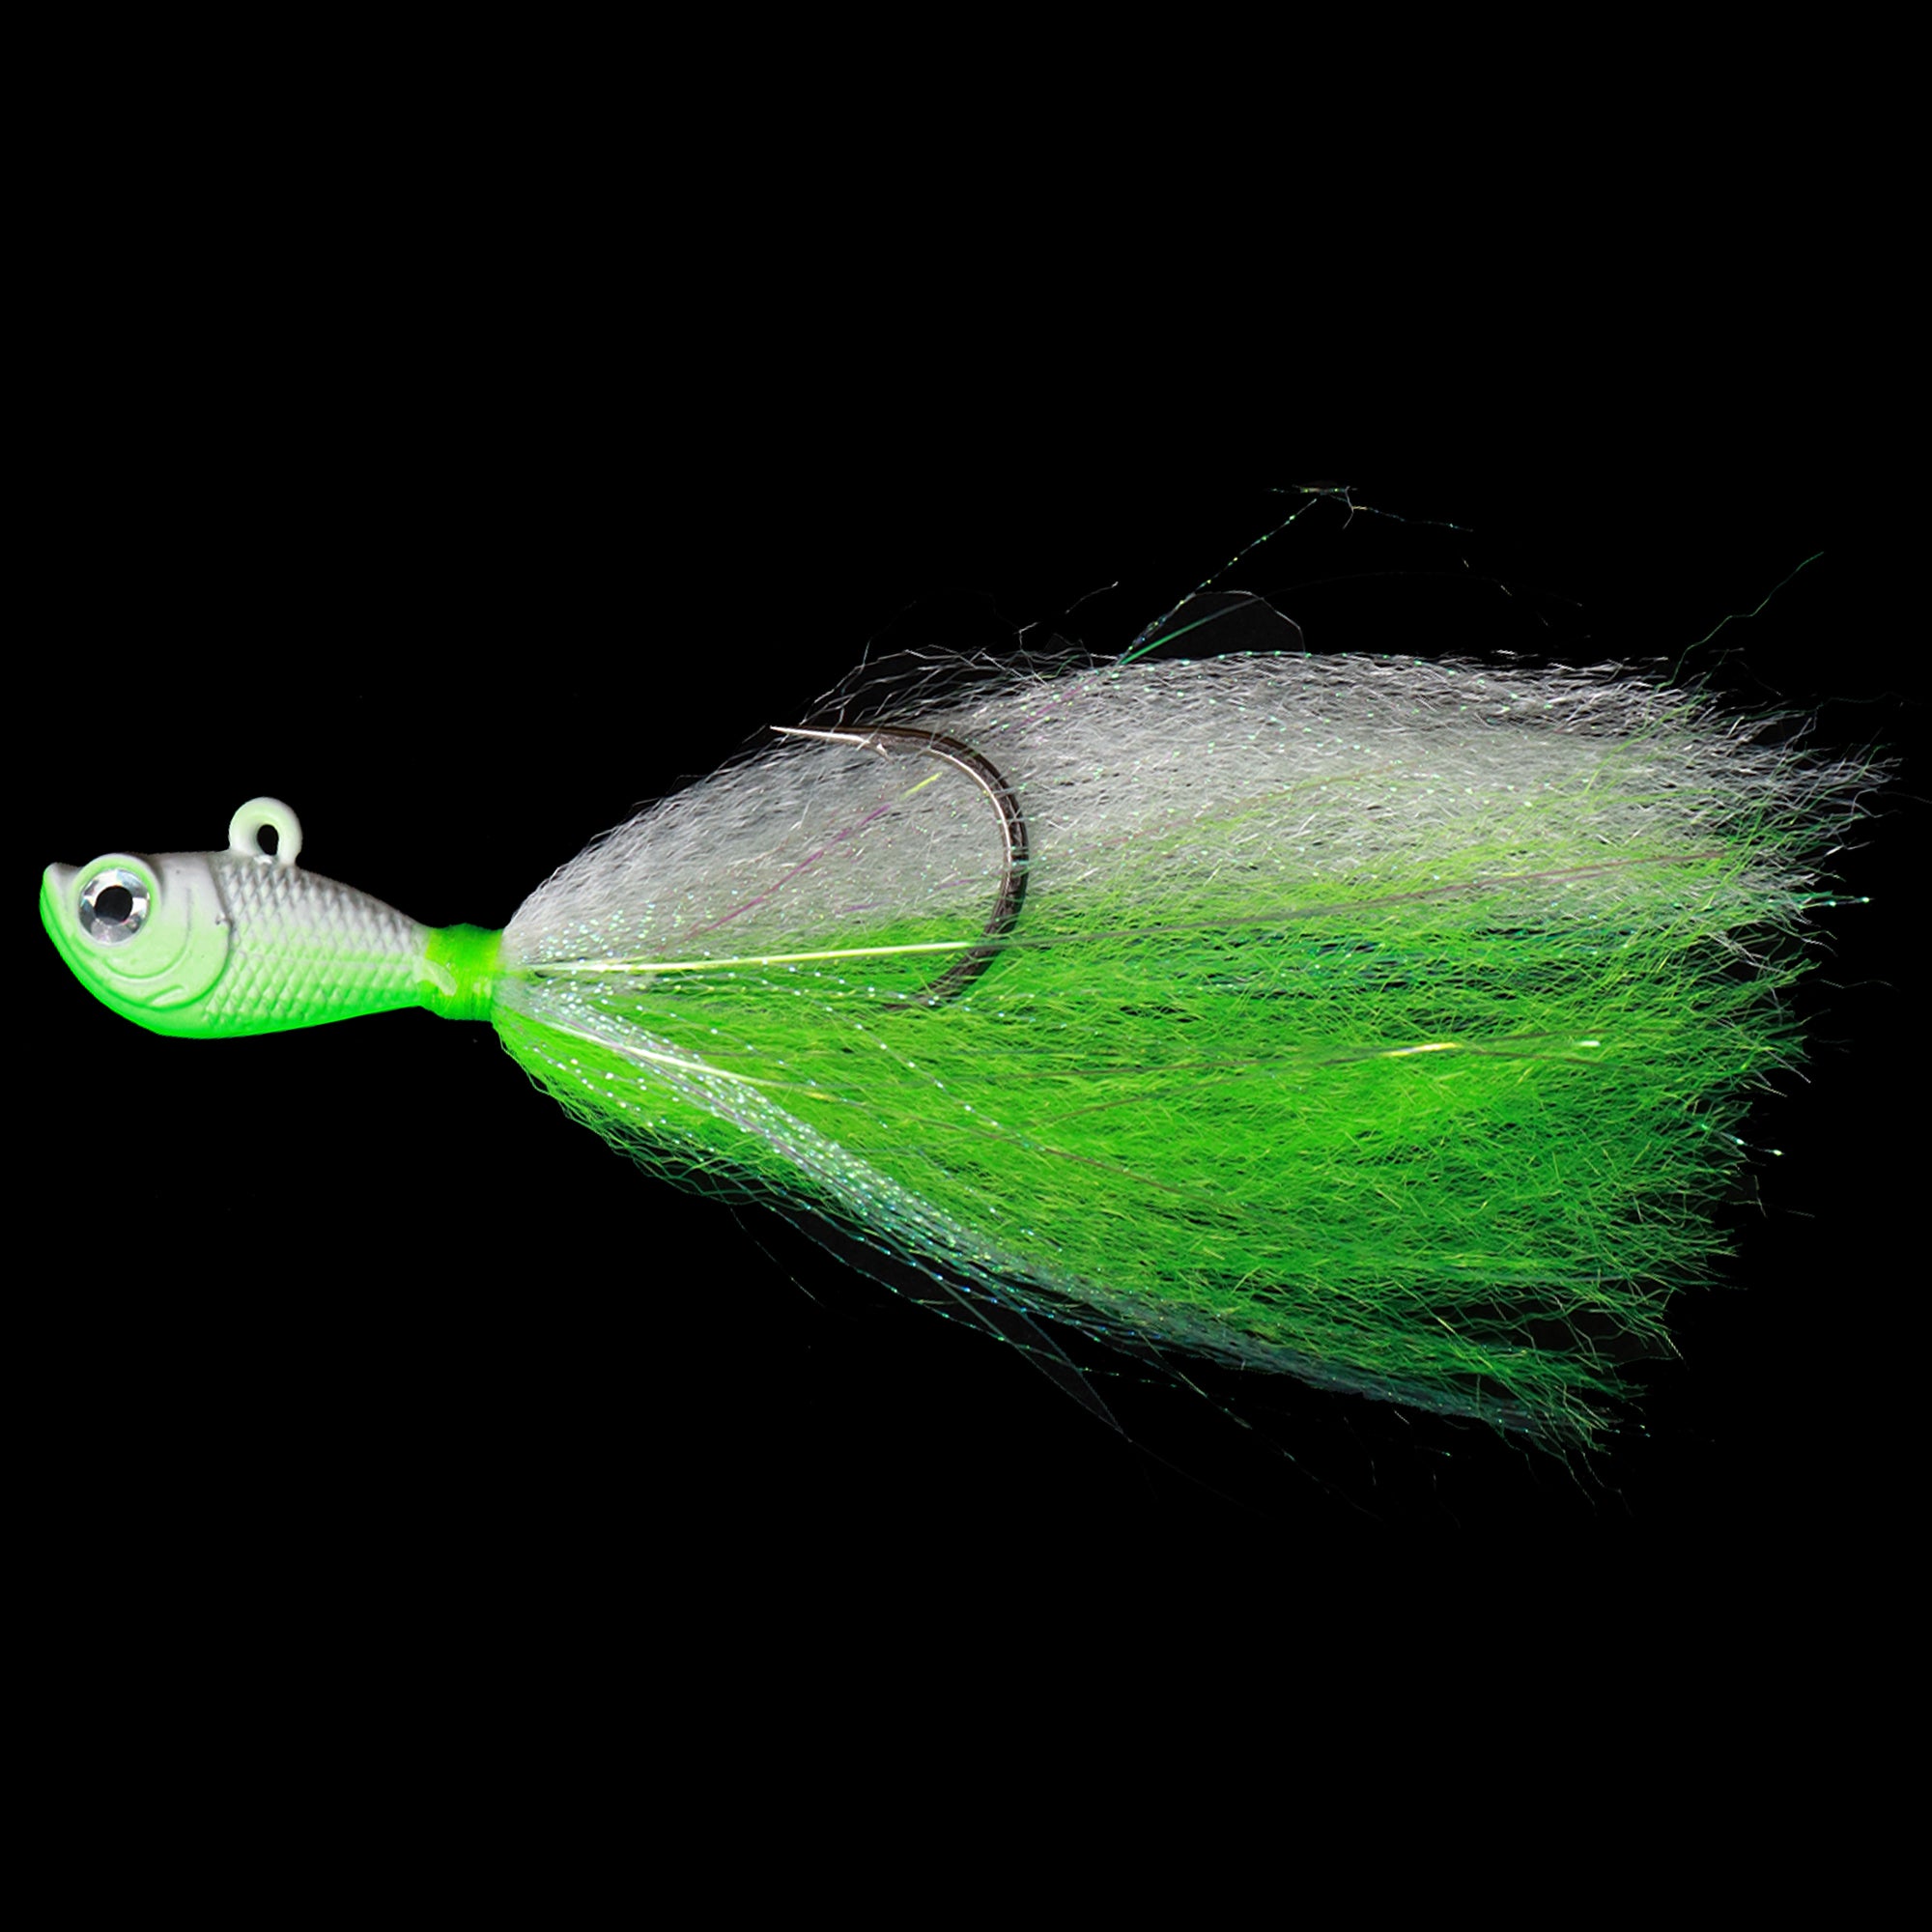 Bait Stalker Jigs: Artificial Lures for Catching Catfish, 3-Pack